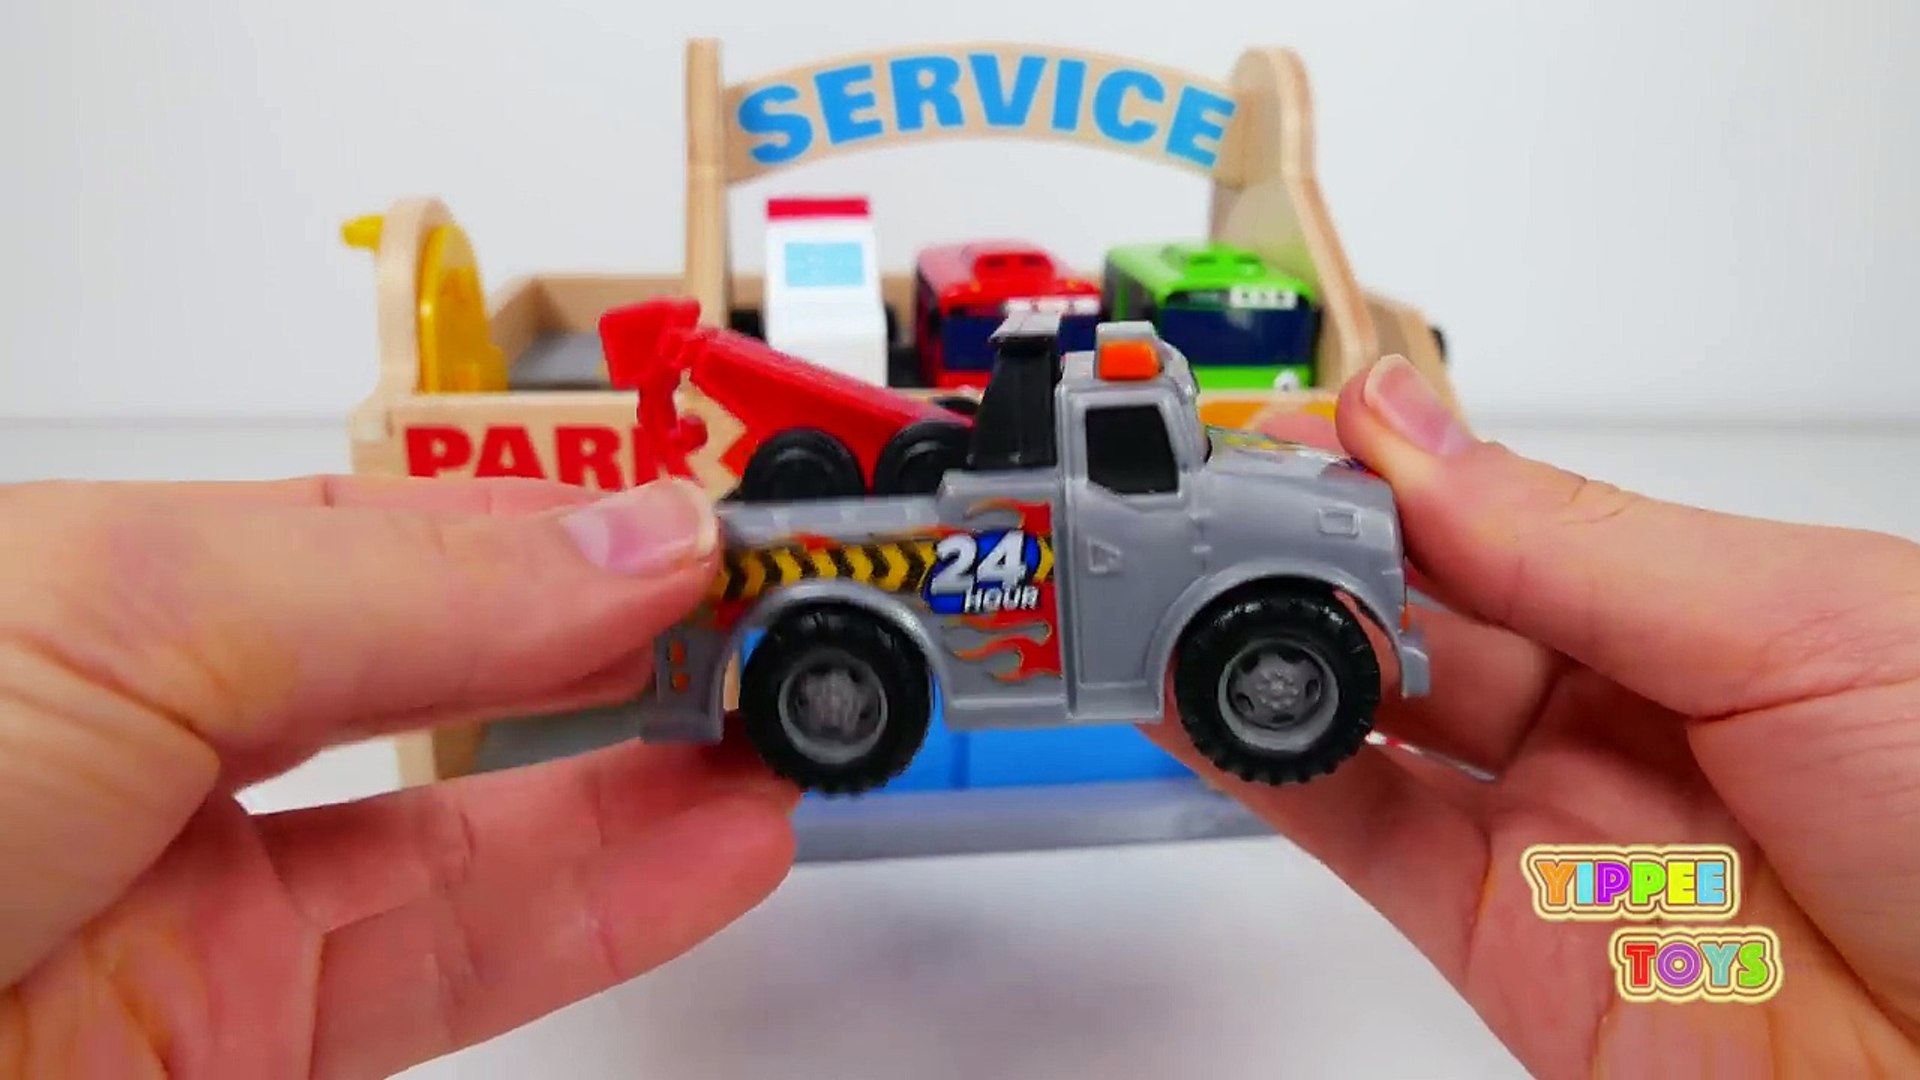 yippee toys garbage truck